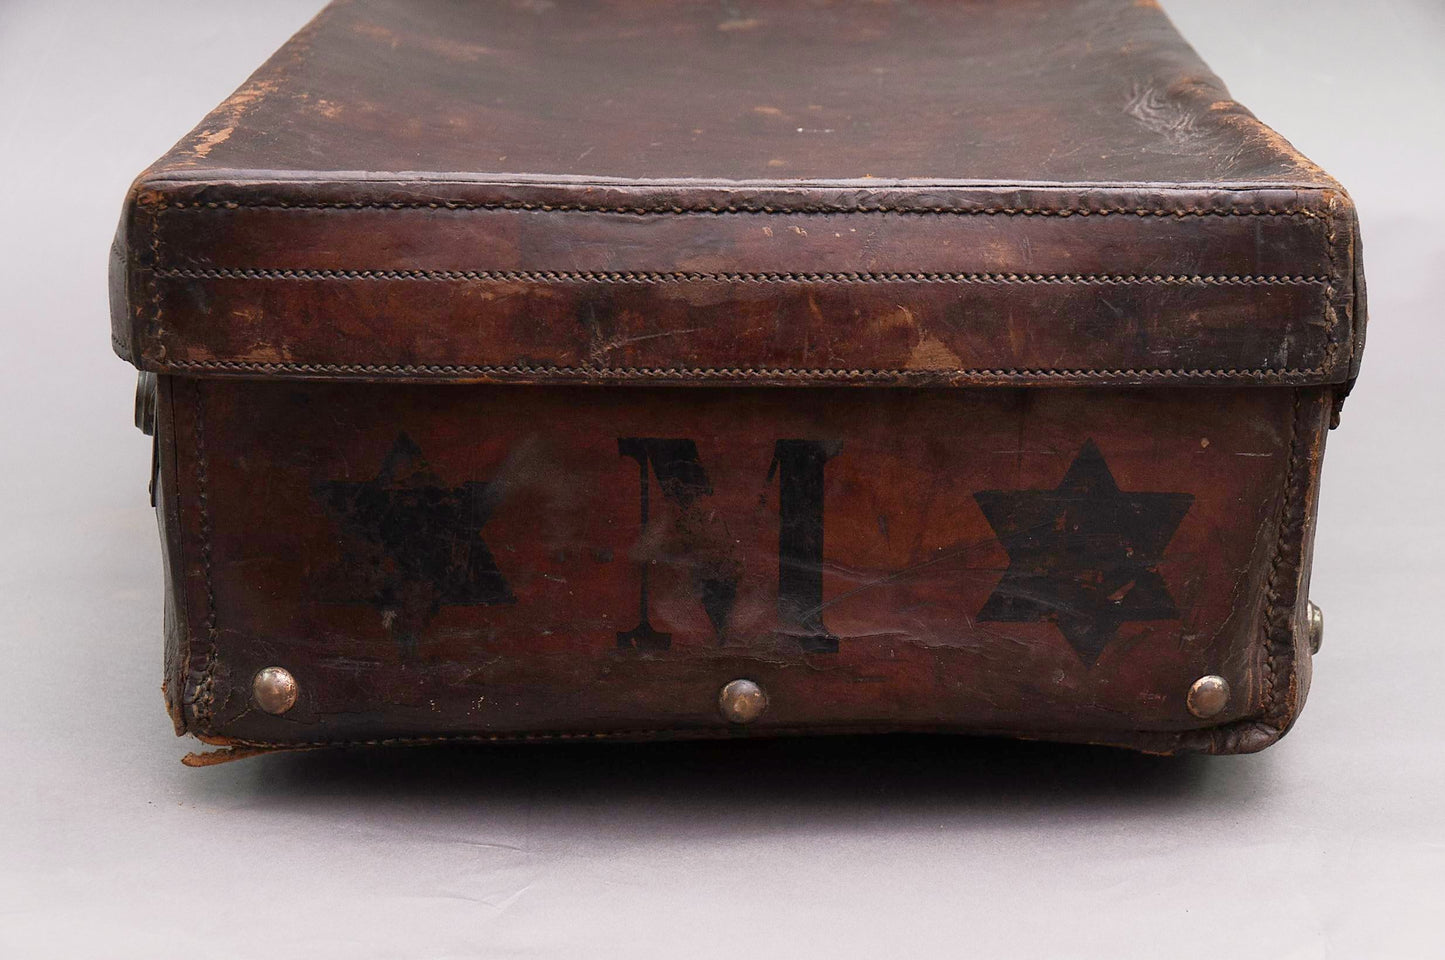 The Goth Cameron - Large Distressed Vintage Leather Storage Suitcase